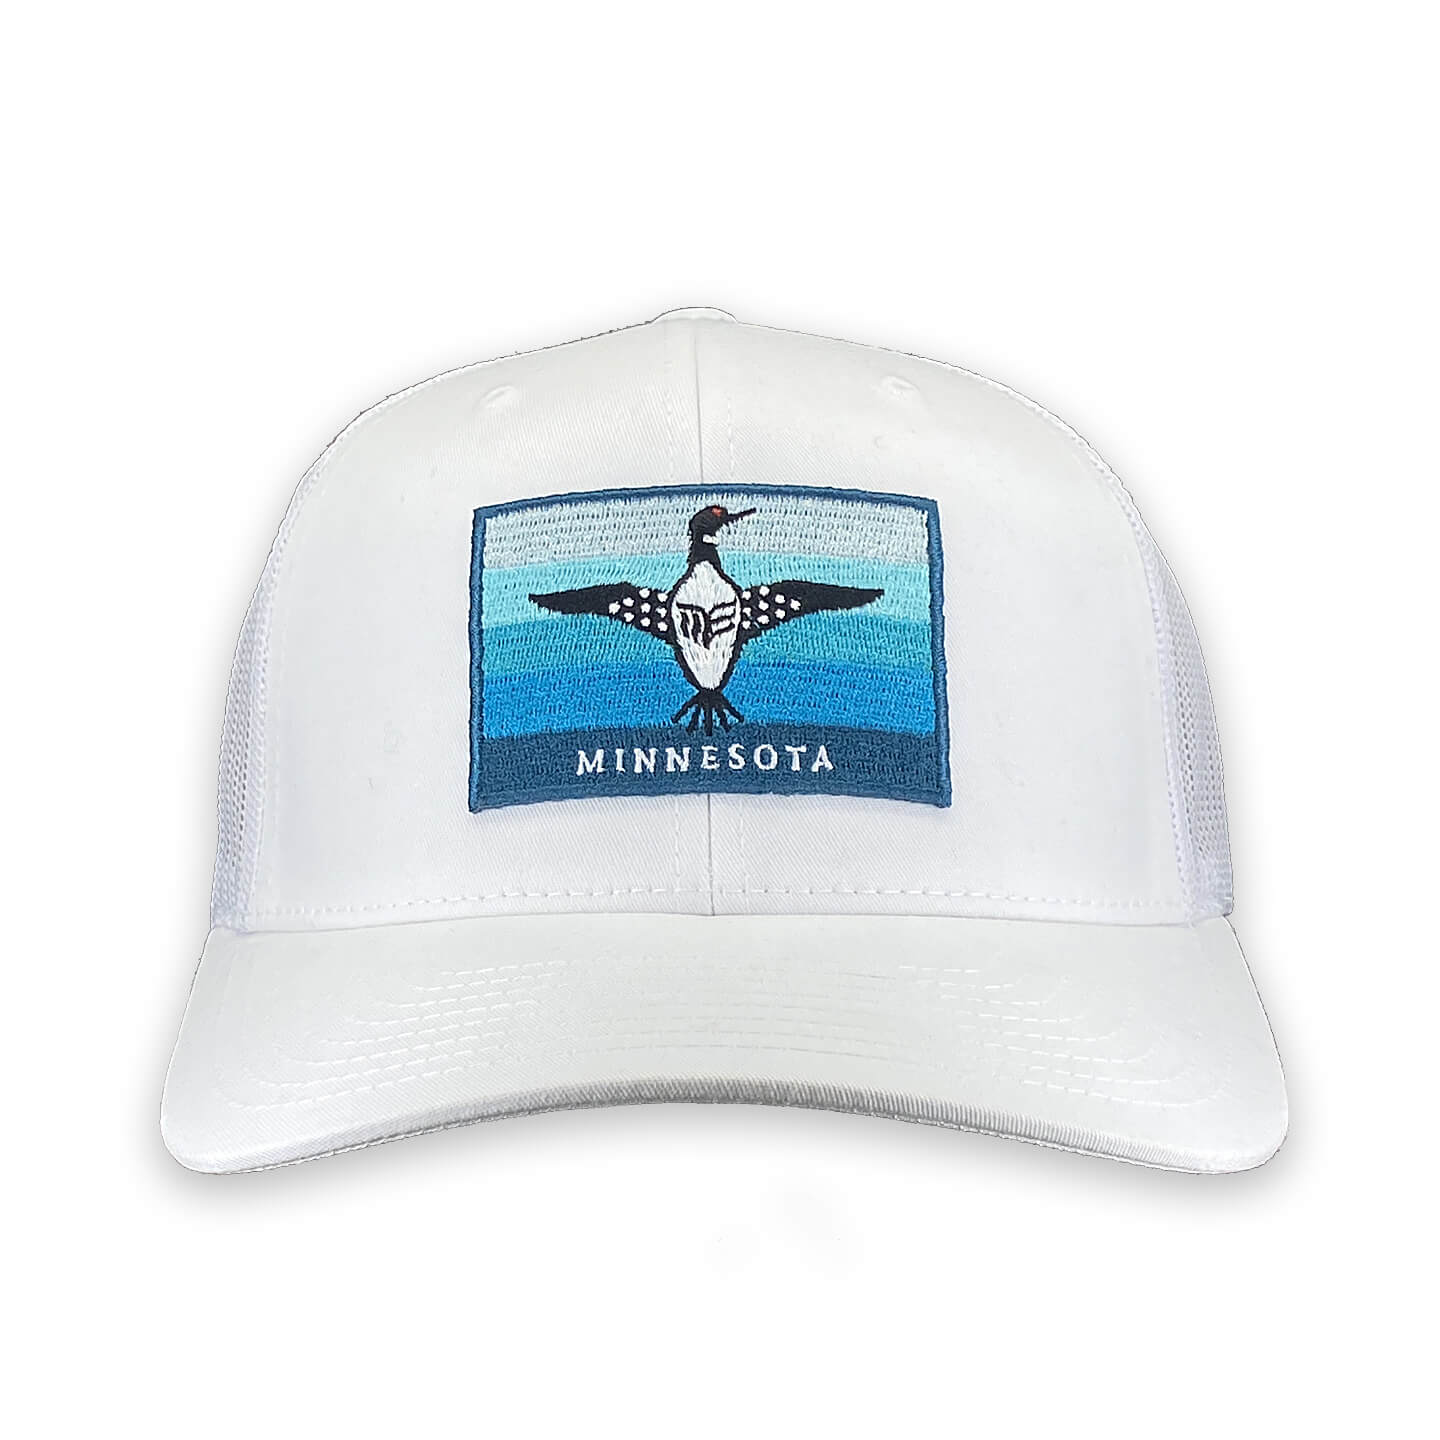 White color 6 panel snapback hat with Loon on Blue Flag embroidery patch